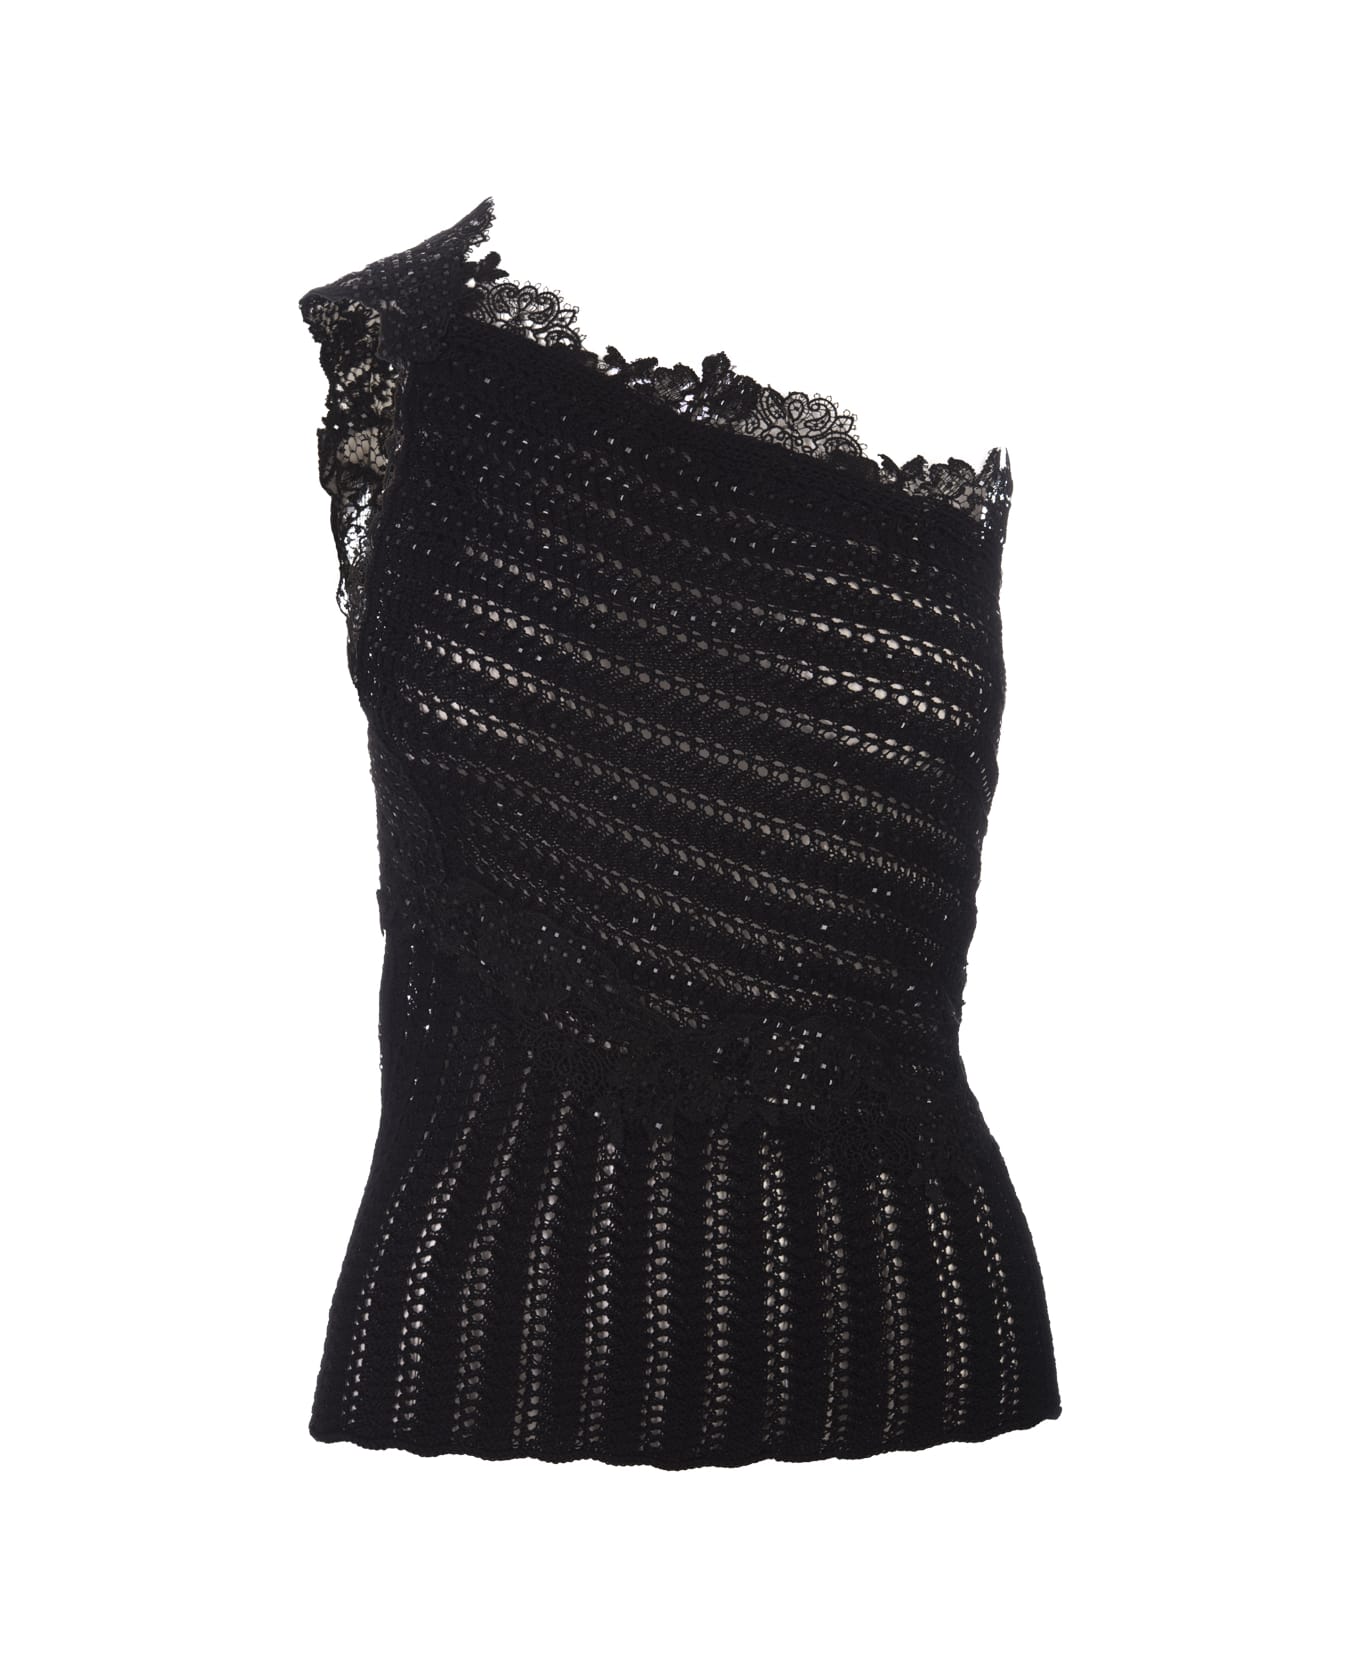 Ermanno Scervino Black Cotton Top With Lace And Crystals - Black